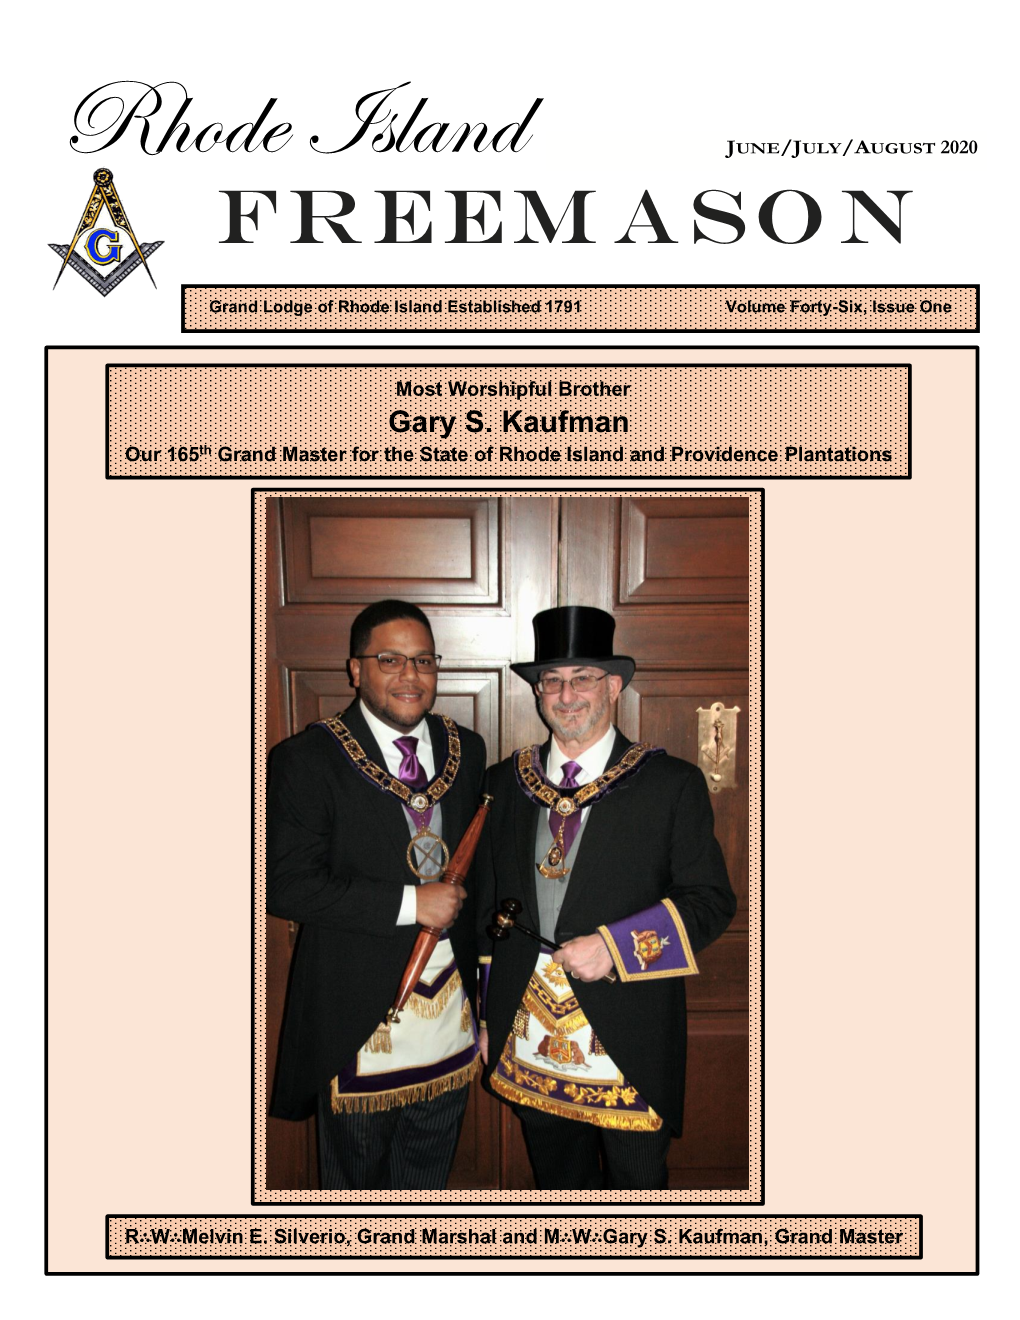 Freemasonry in Rhode Island Look Like in Our Case Scenario and Hoping for the Best-Case Scenario